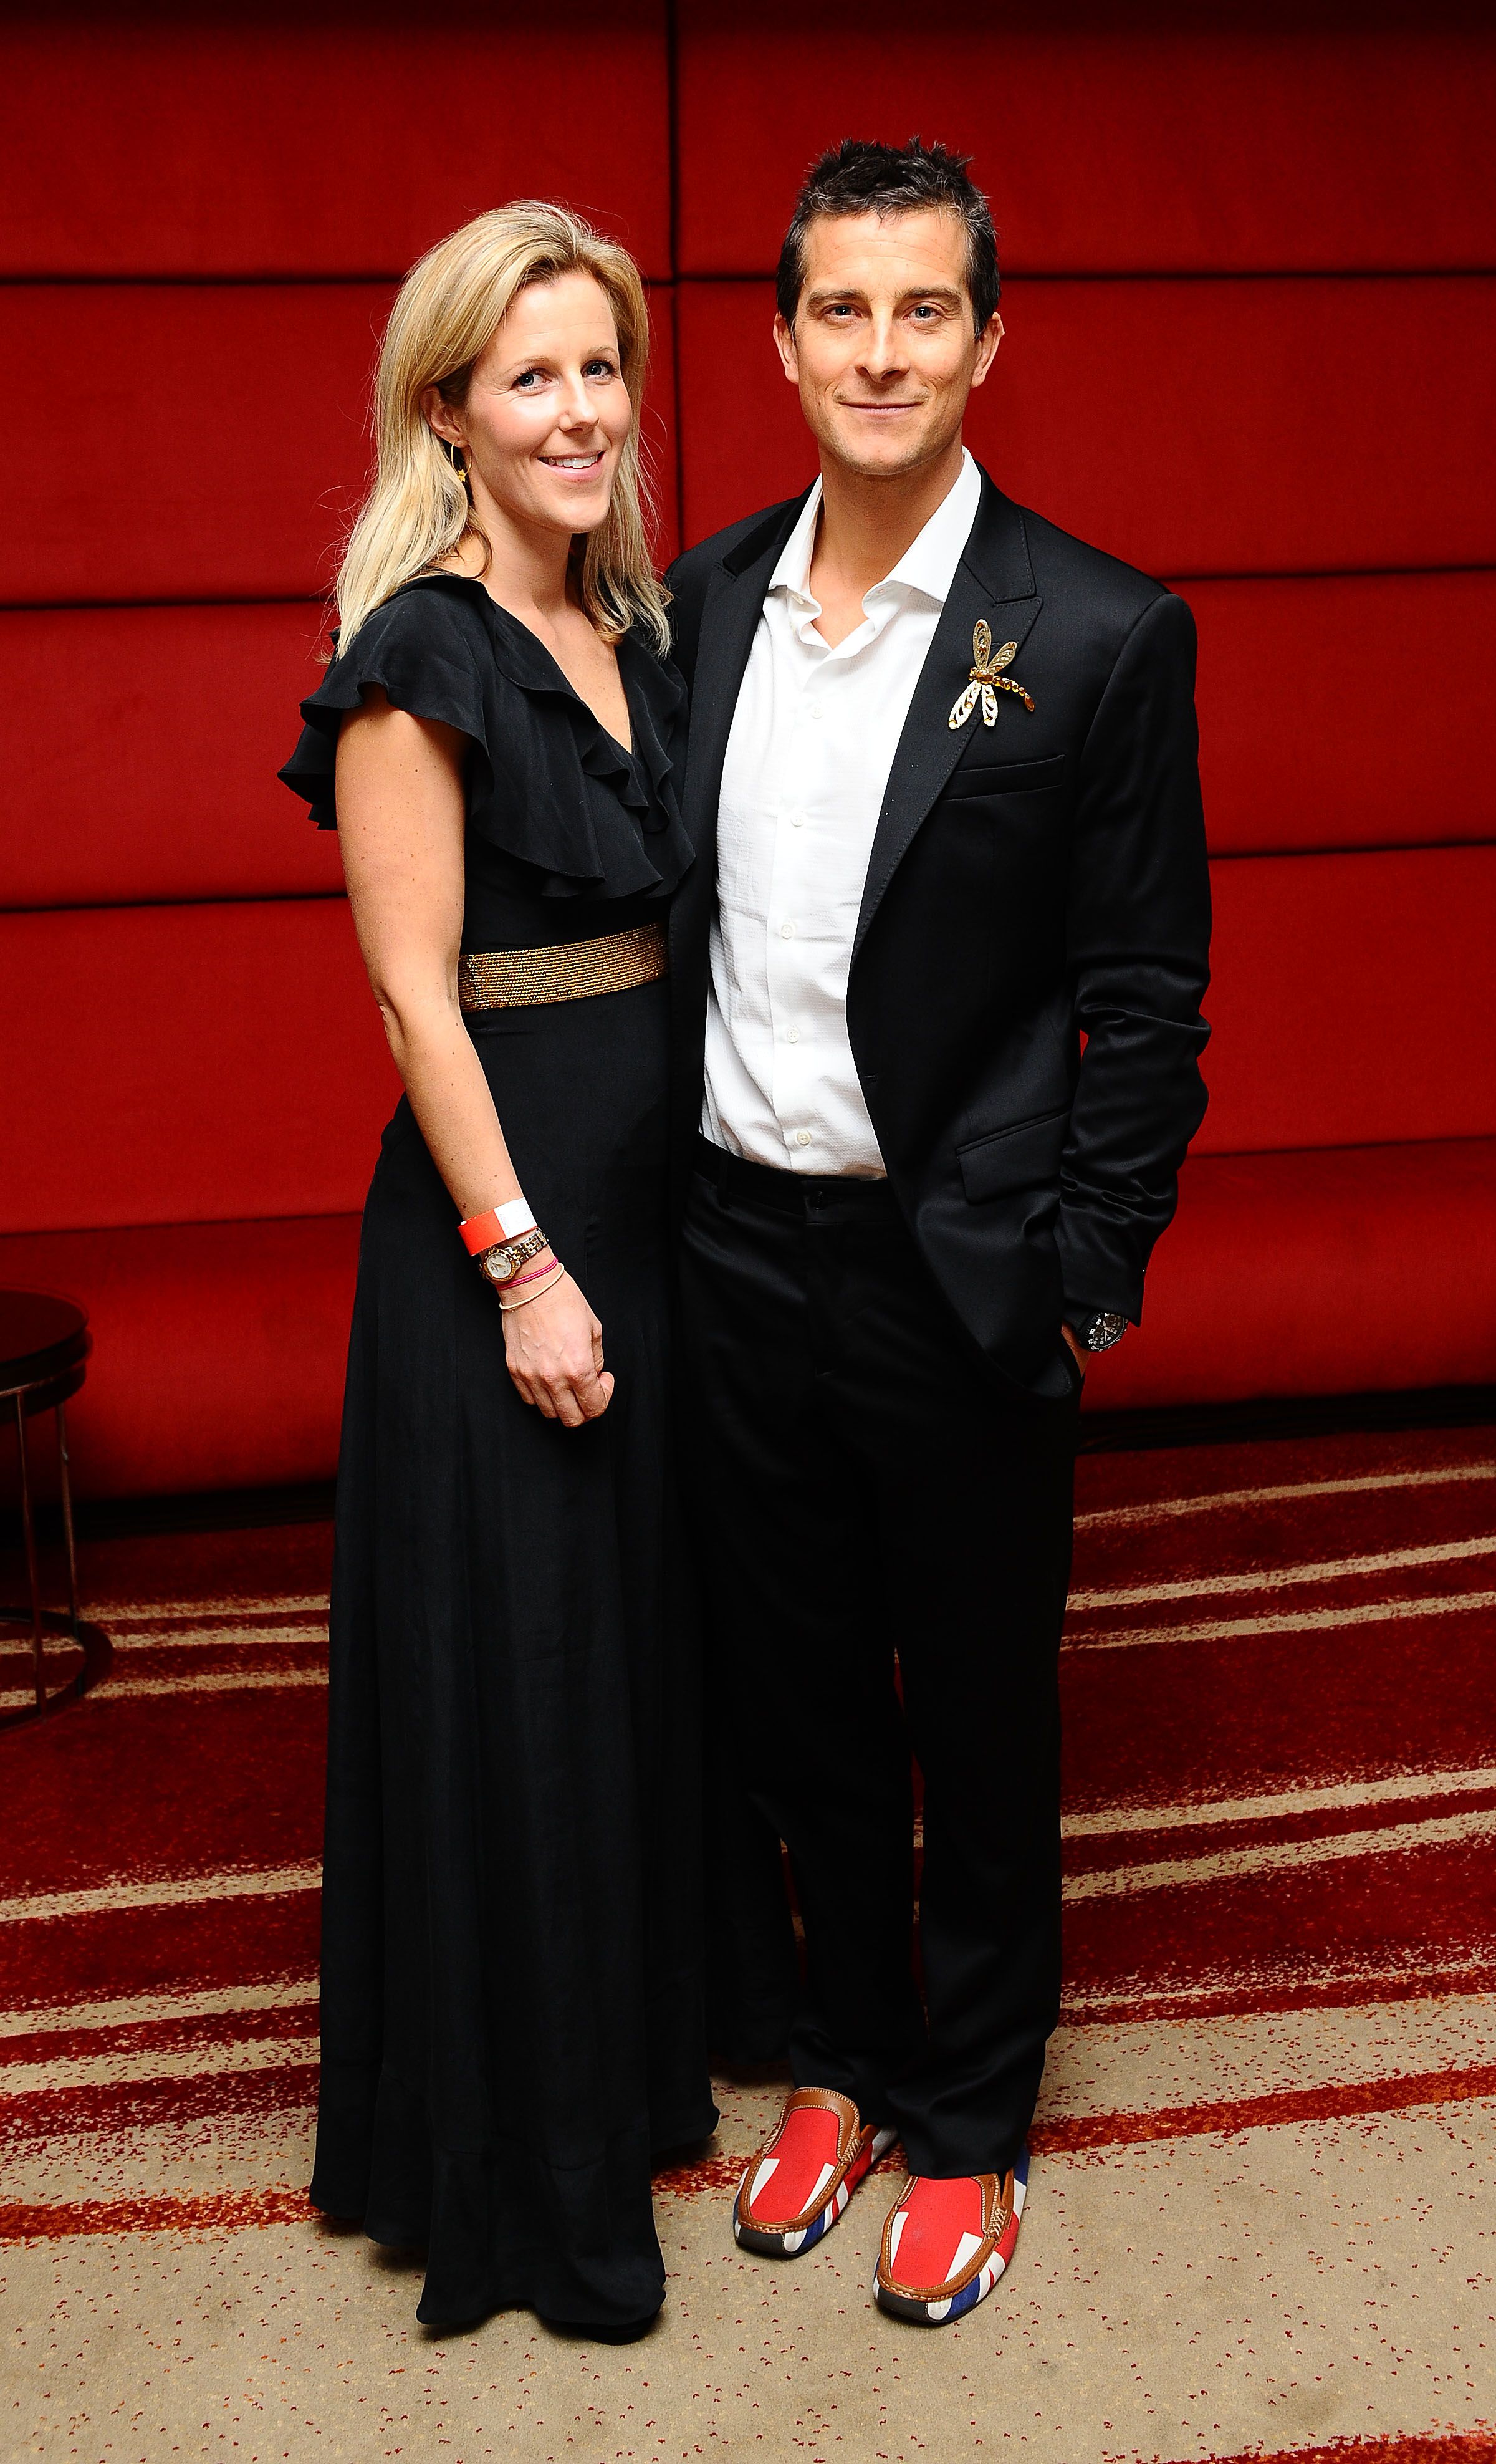 Bear Grylls and wife Shara at the Global Angel Awards in London | Source: Getty Images